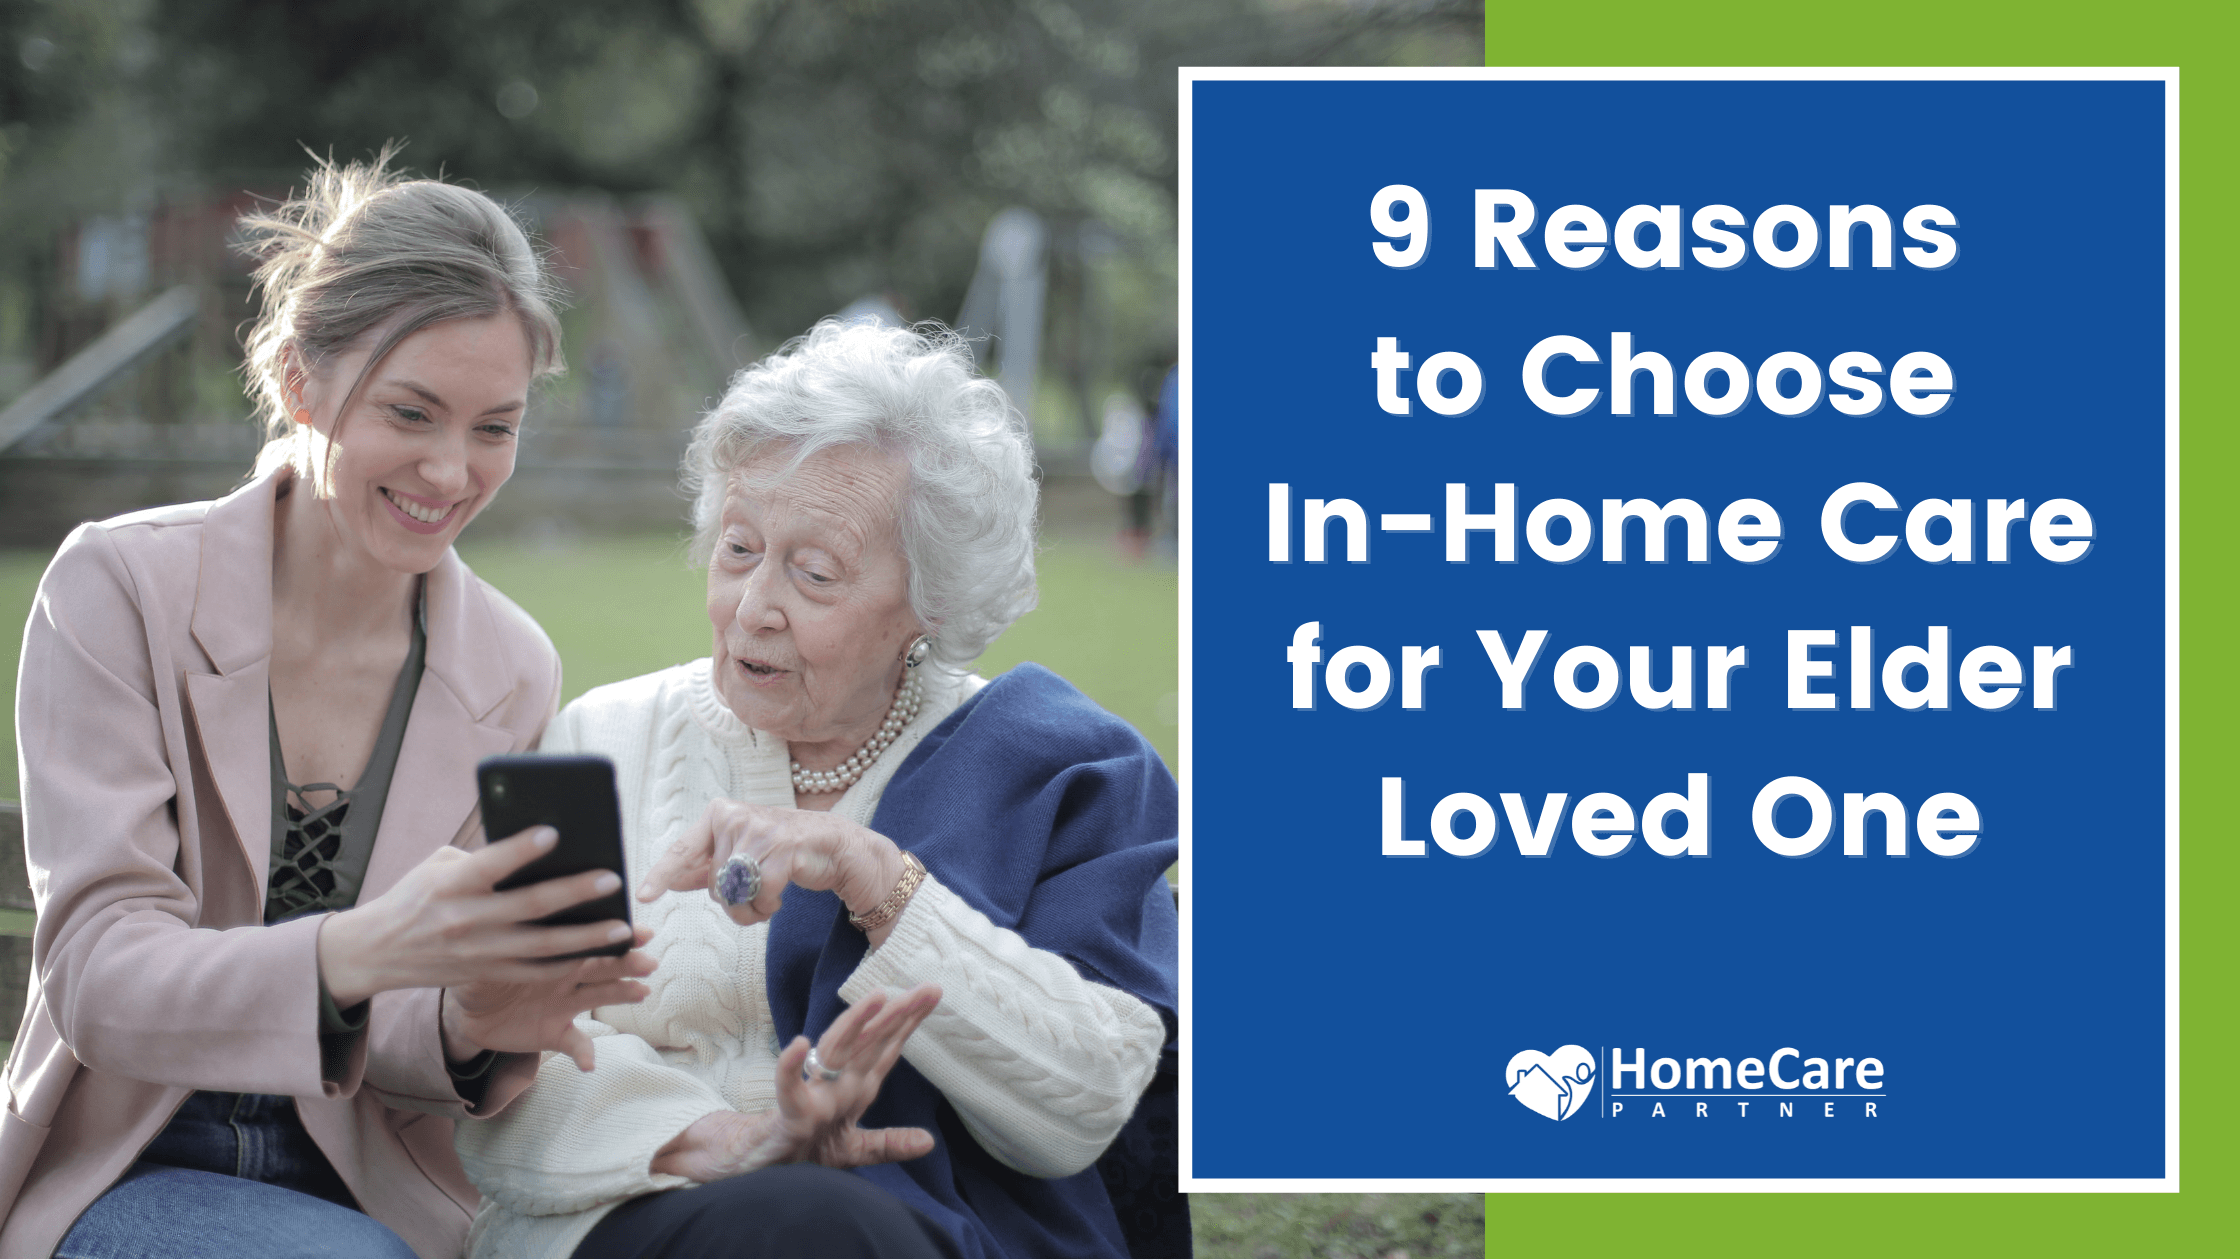 9 Reasons to Choose In-Home Care for Your Elder Loved One